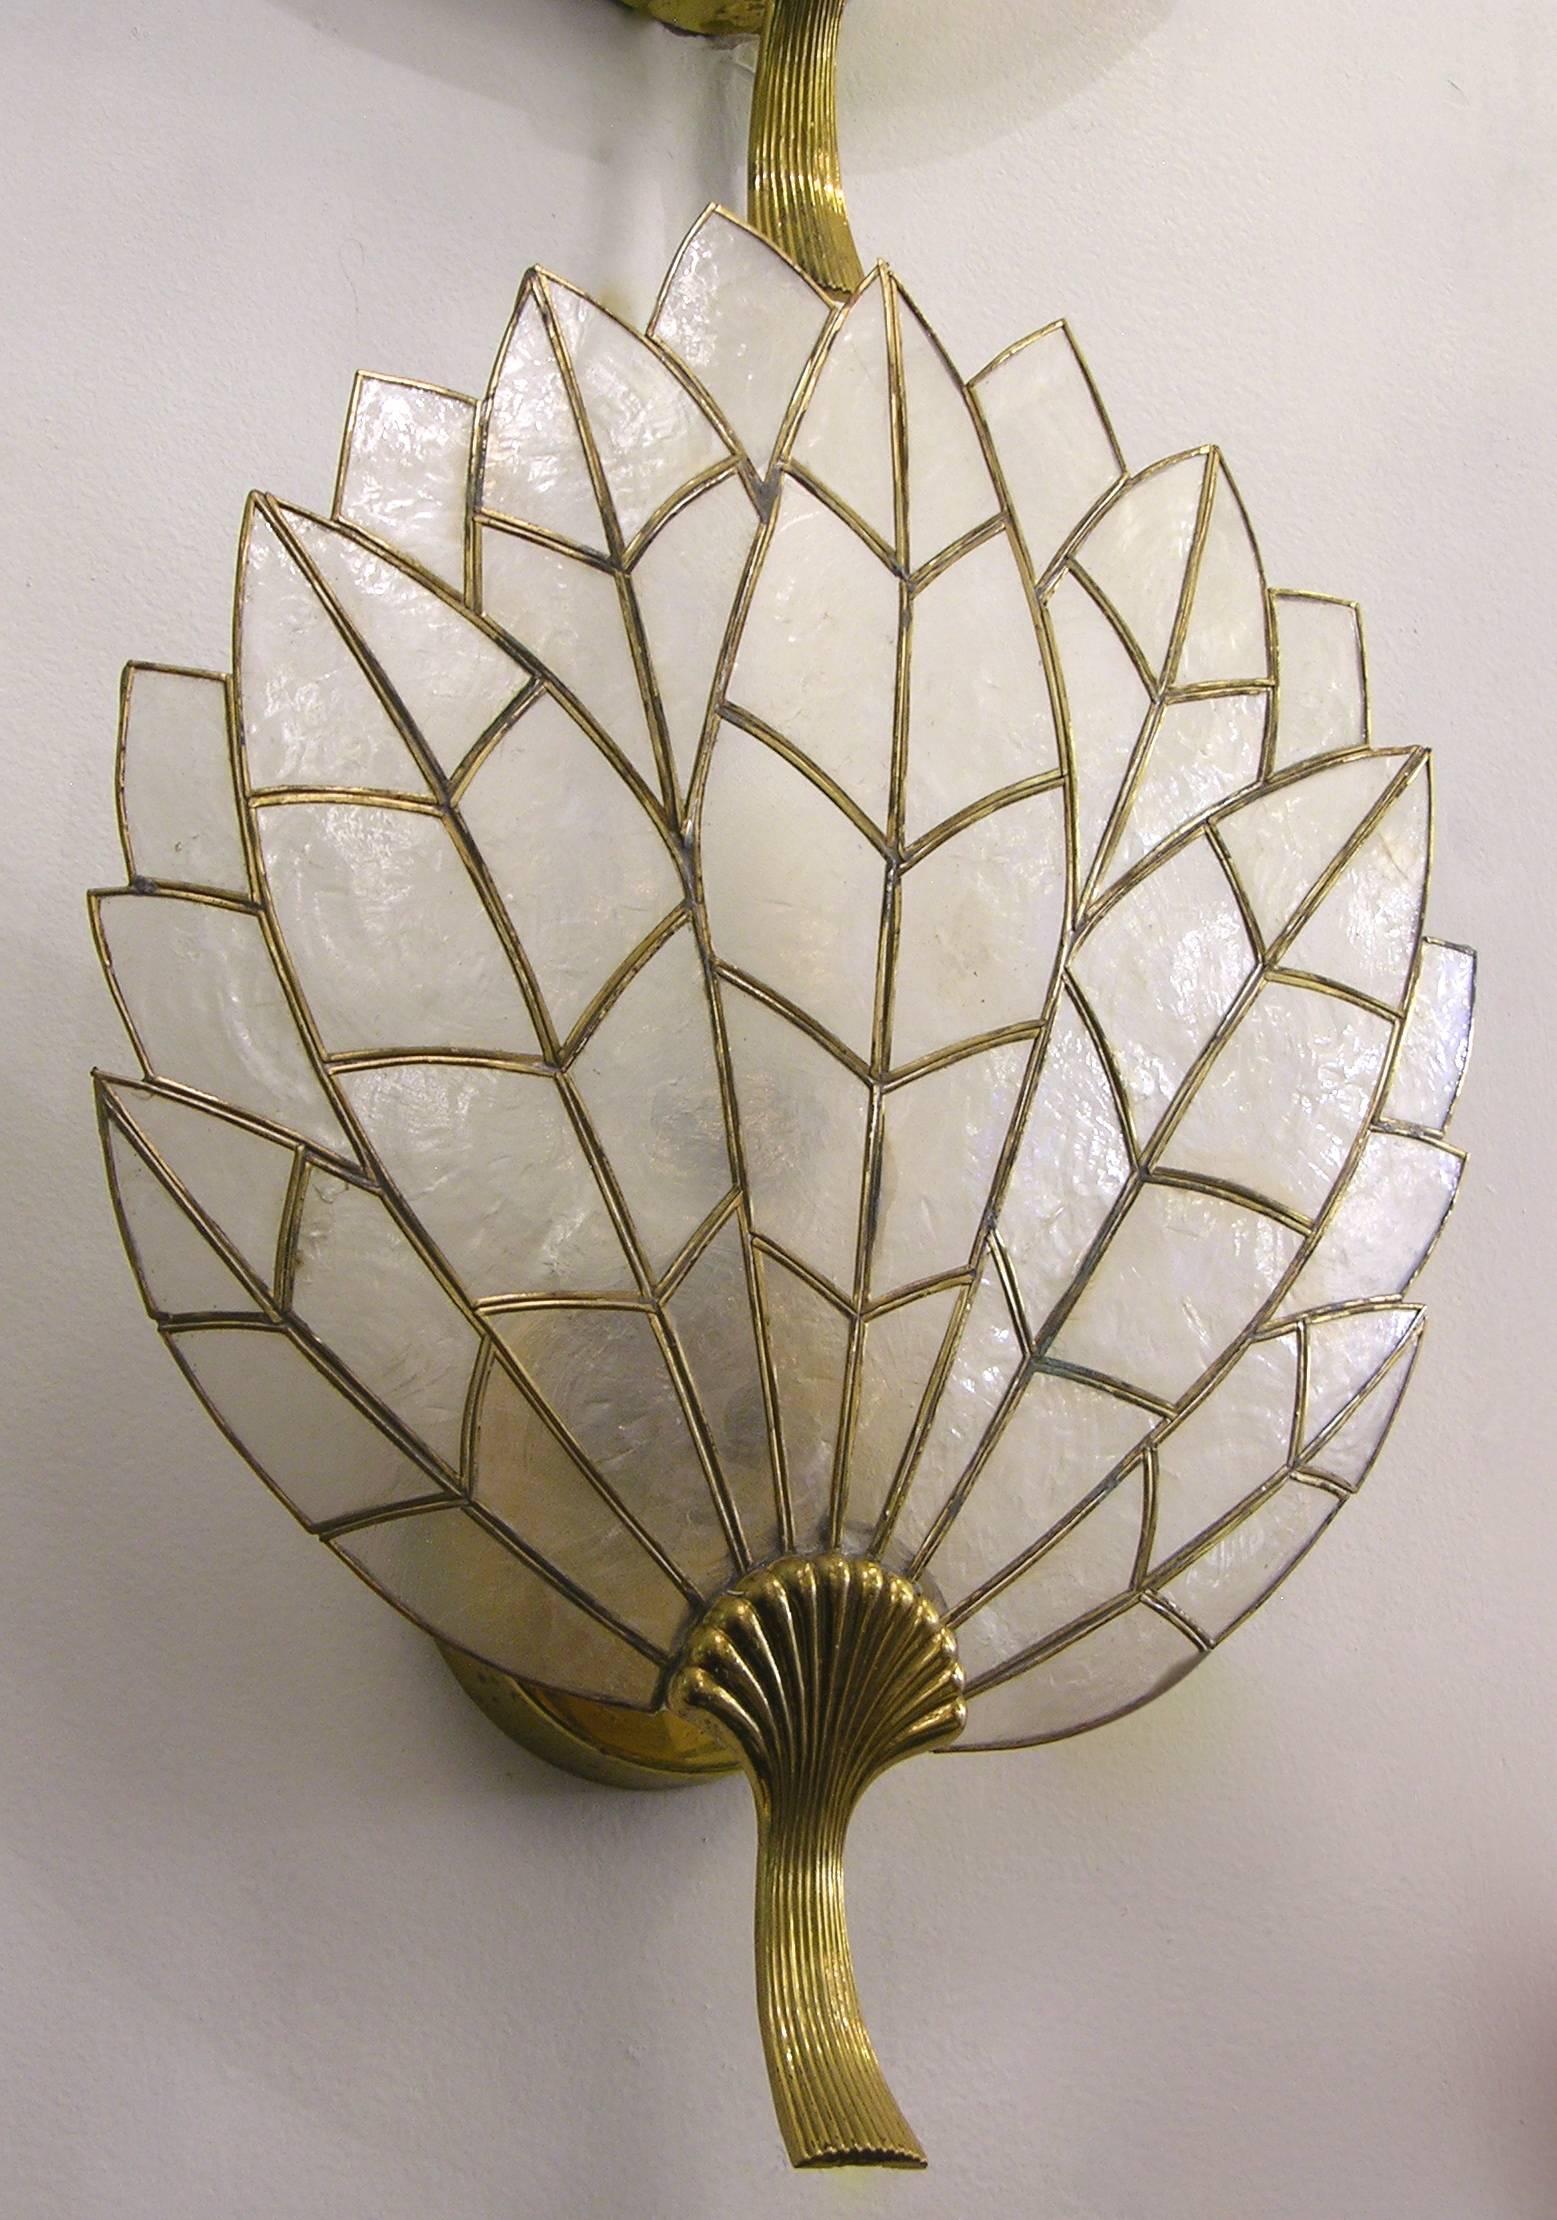 1930s, exquisite French handcrafted mother-of-pearl leaded wall lights, leaves in a fan shape, each one composed of small mother-of-pearl panes hand fixed together with thin lead strips, supported by nicely handcrafted chased brass stems on a round